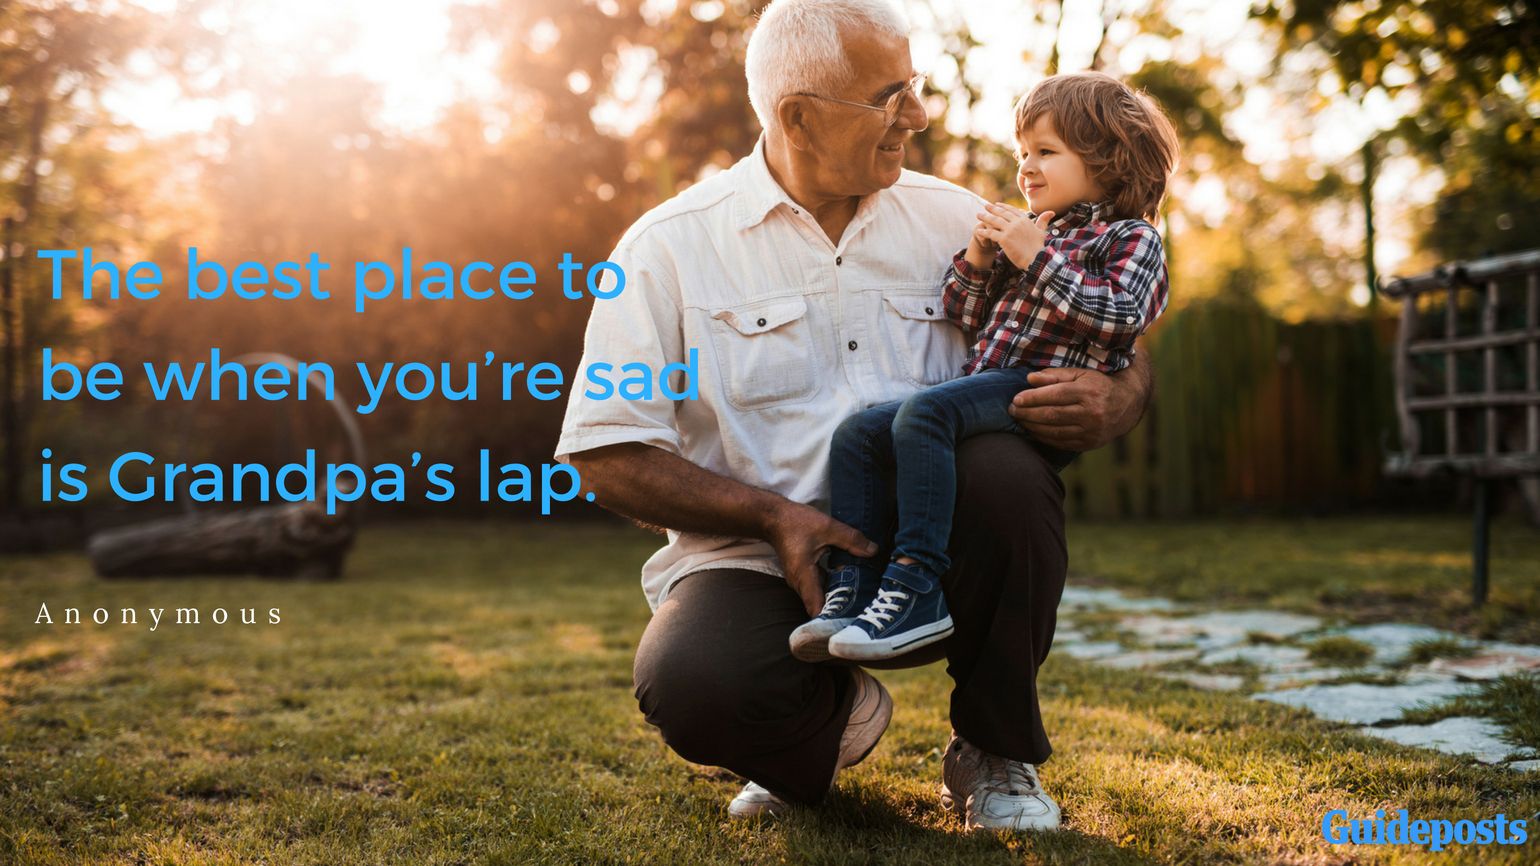 The best place to be when you’re sad is Grandpa’s lap. —Anonymous